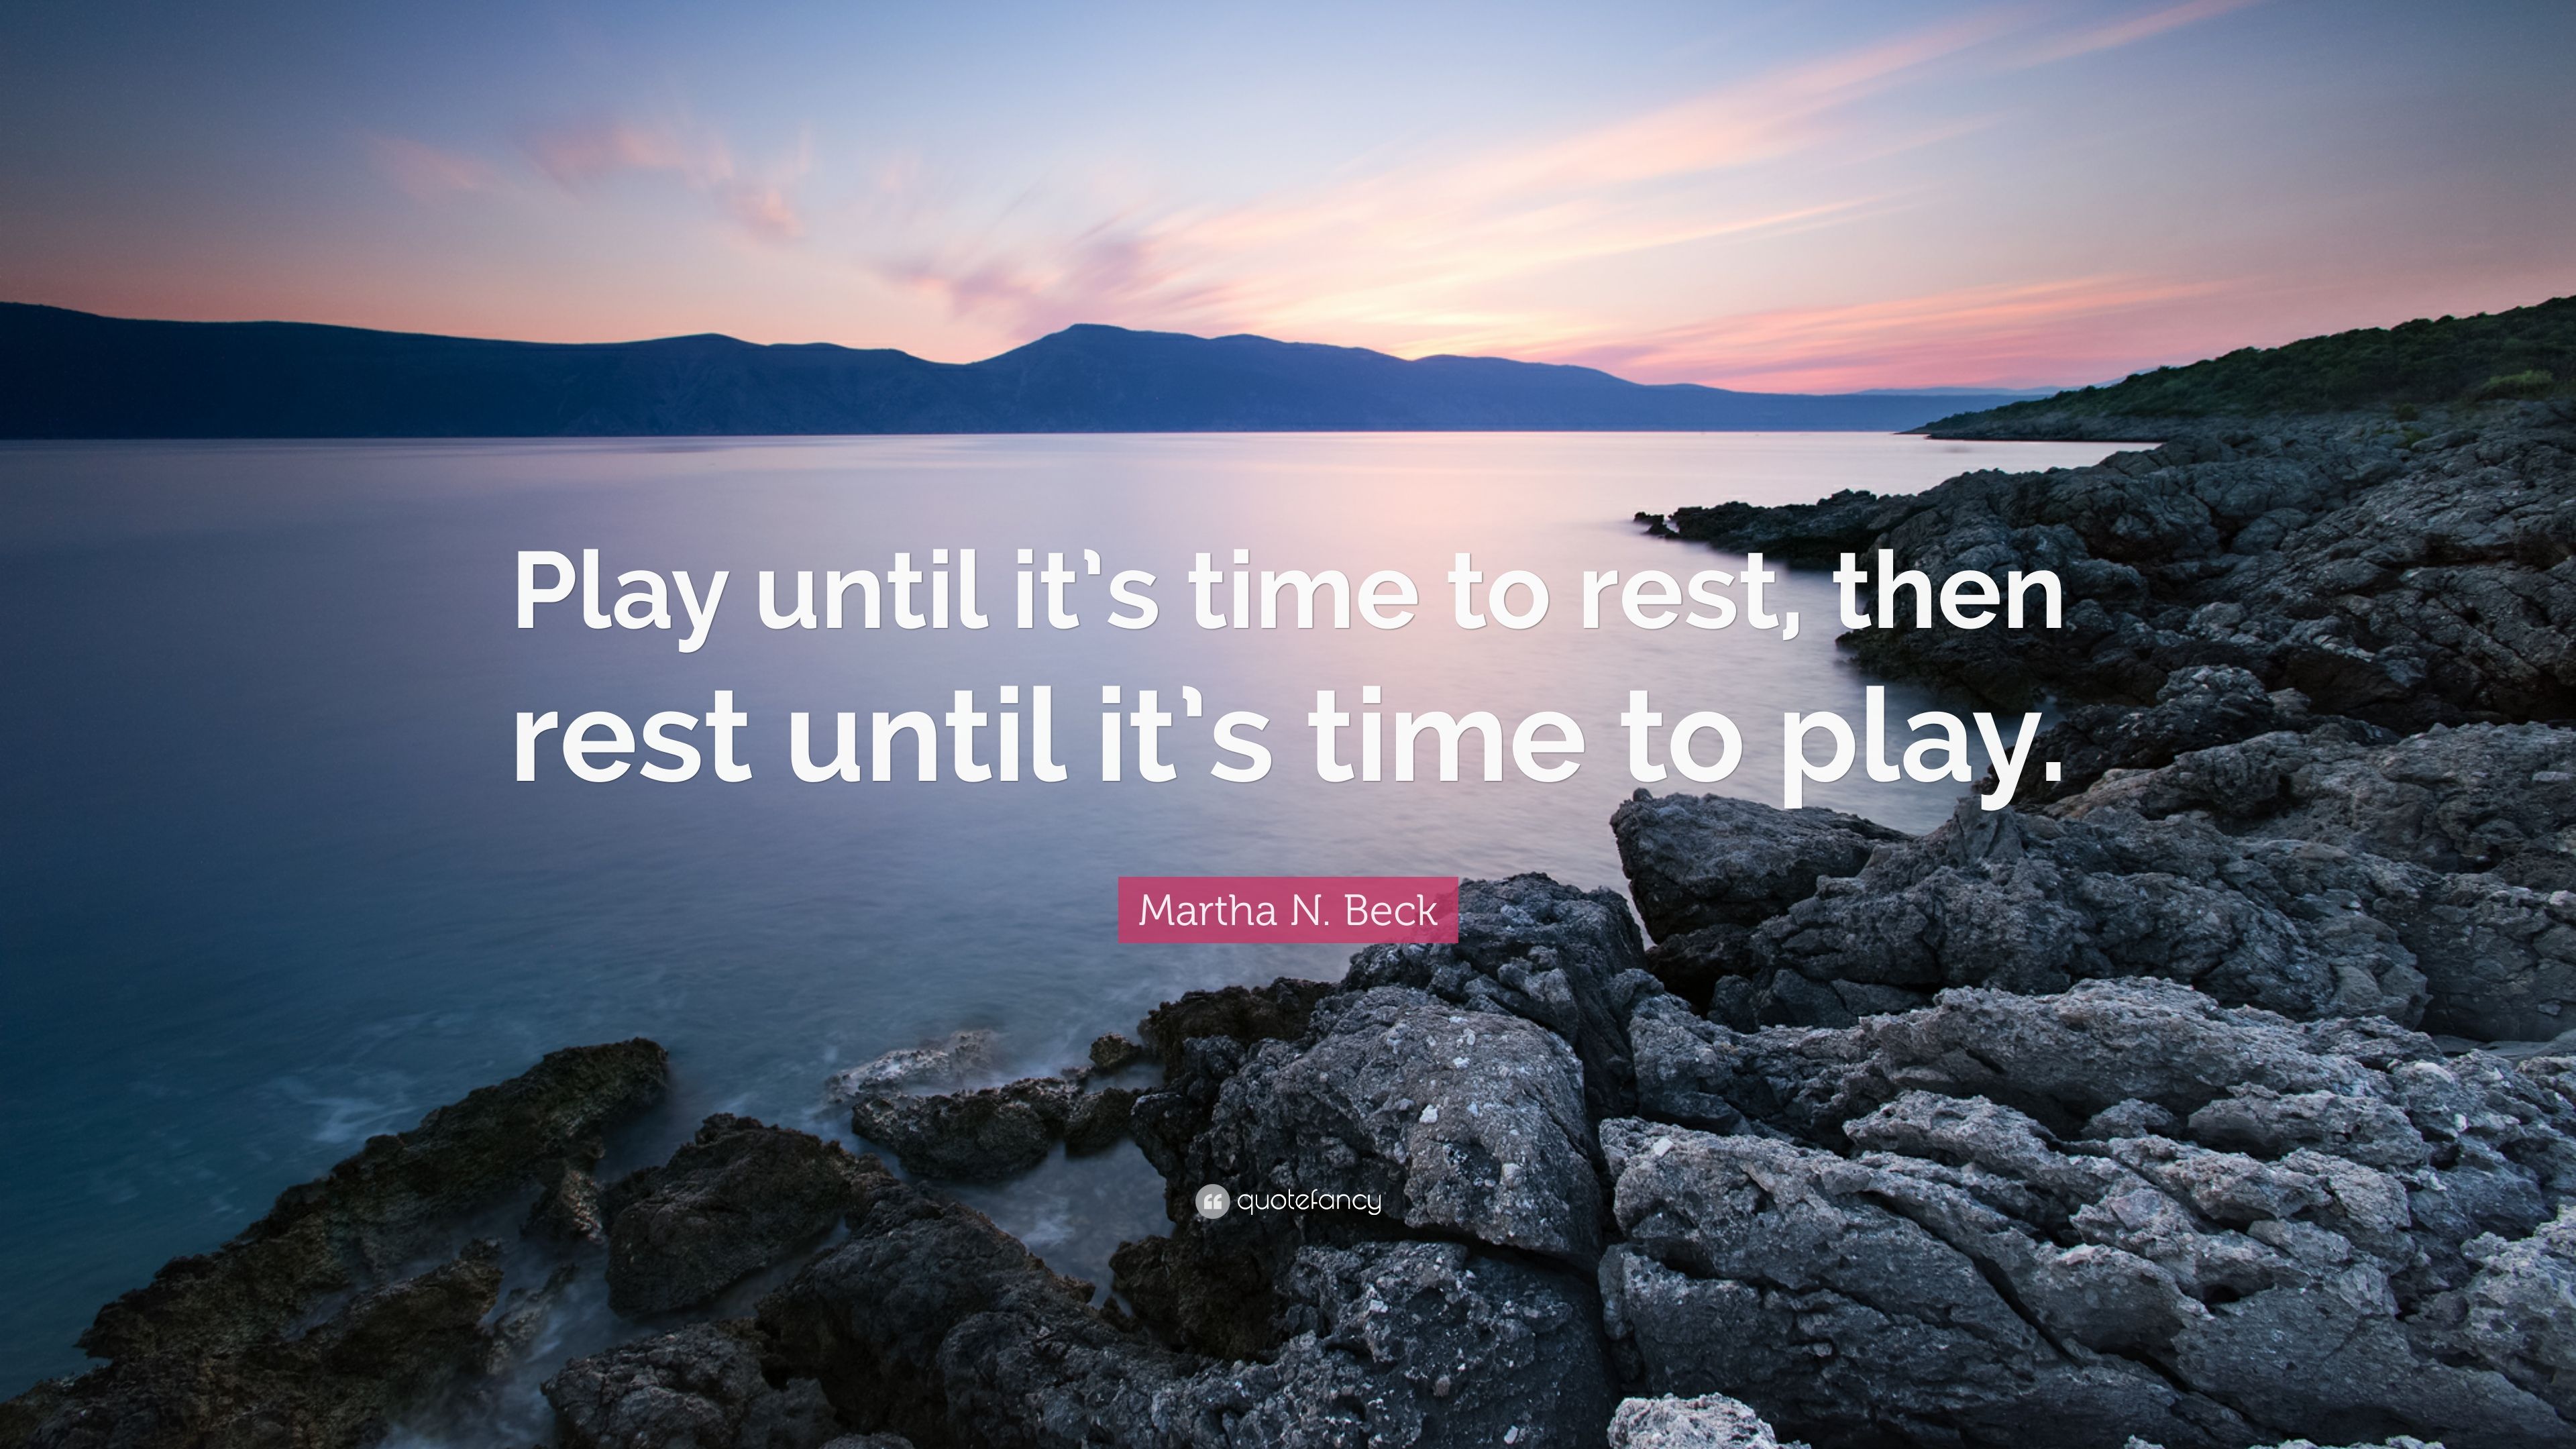 Martha N. Beck Quote: “Play until it's time to rest, then rest until it's time to play.” (7 wallpaper)